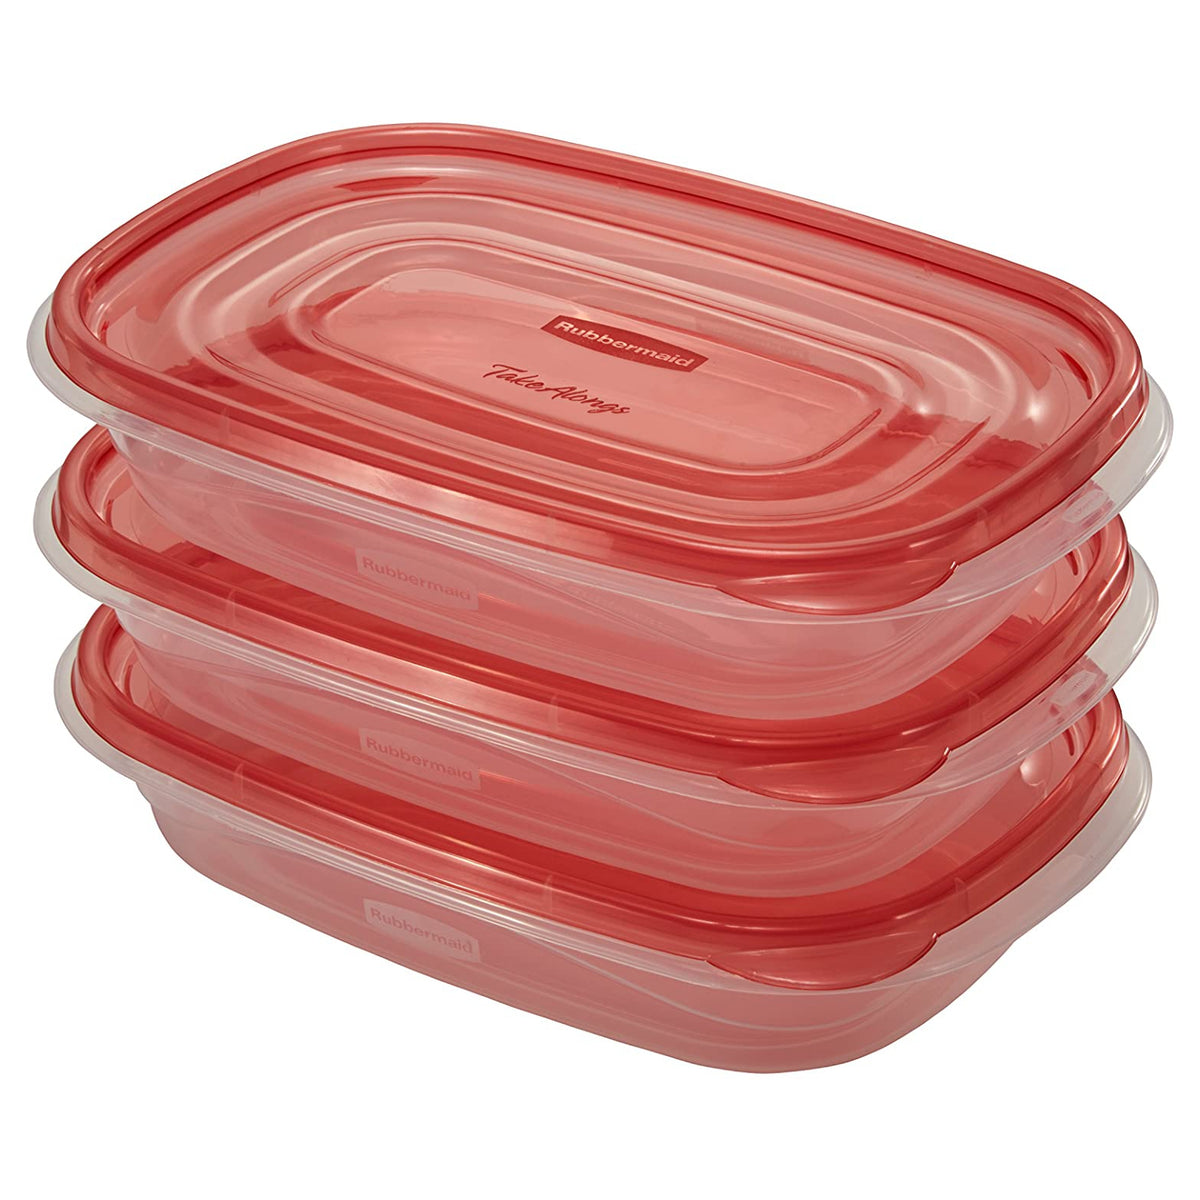 Rubbermaid Rectangle Food Storage Containers